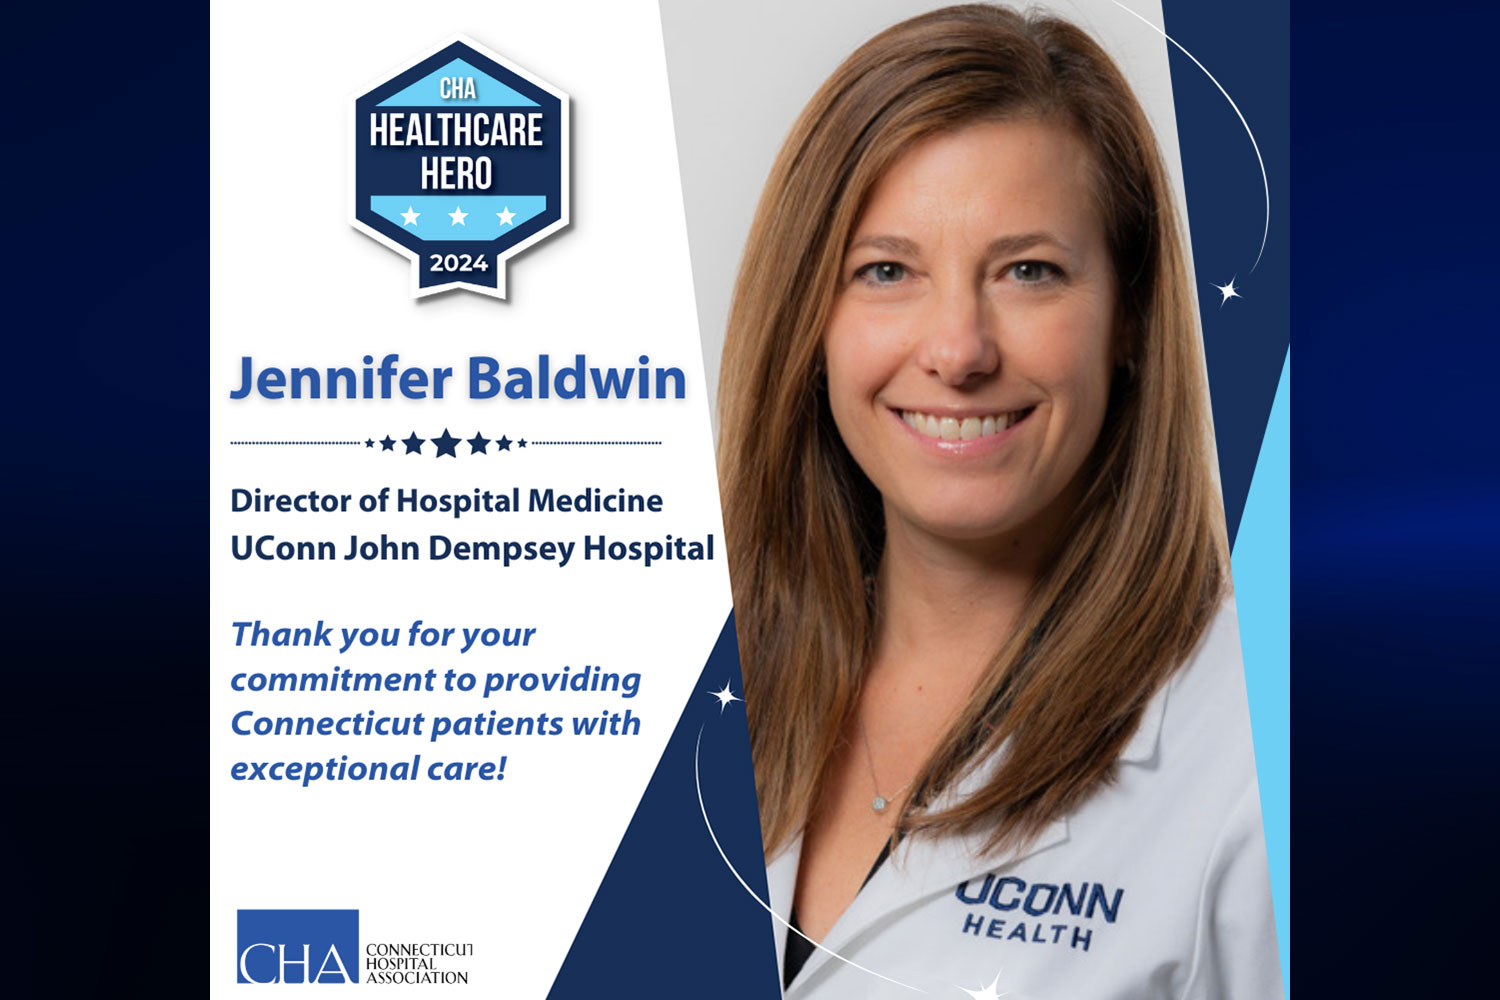 Dr. Jennifer Baldwin Crowned as ‘Healthcare Hero’ by the CHA